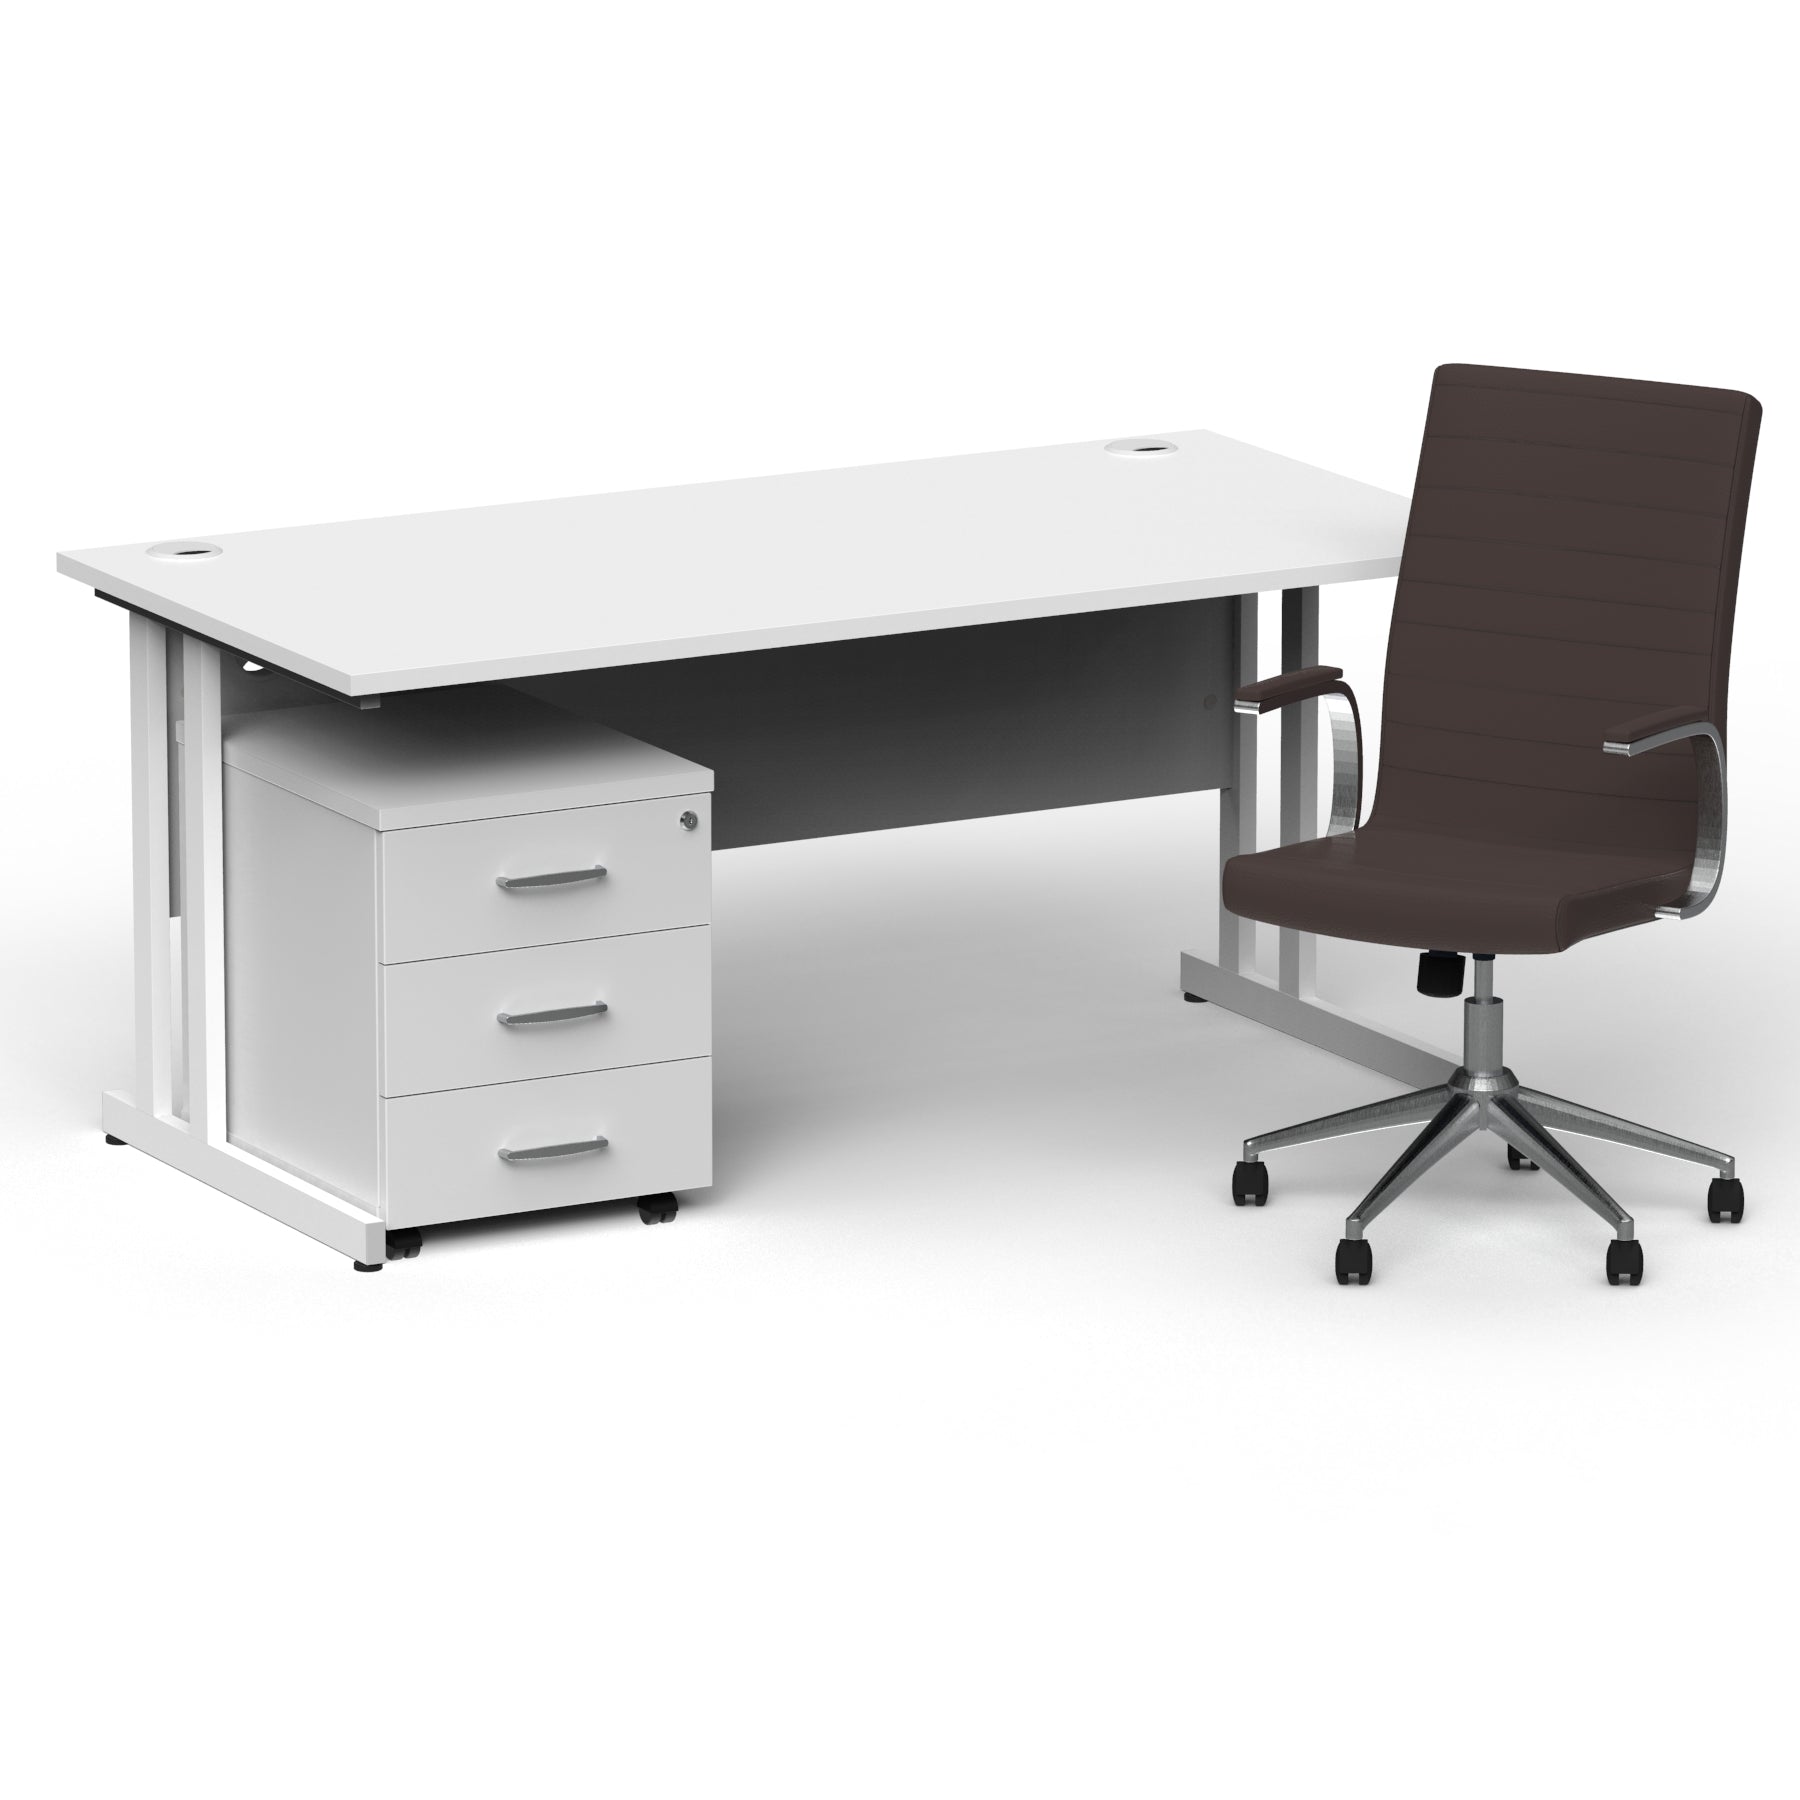 Impulse 1600mm Cantilever Straight Desk & Mobile Pedestal with Ezra Brown Executive Chair - 5-Year Furniture Guarantee, 2-Year Seating Guarantee